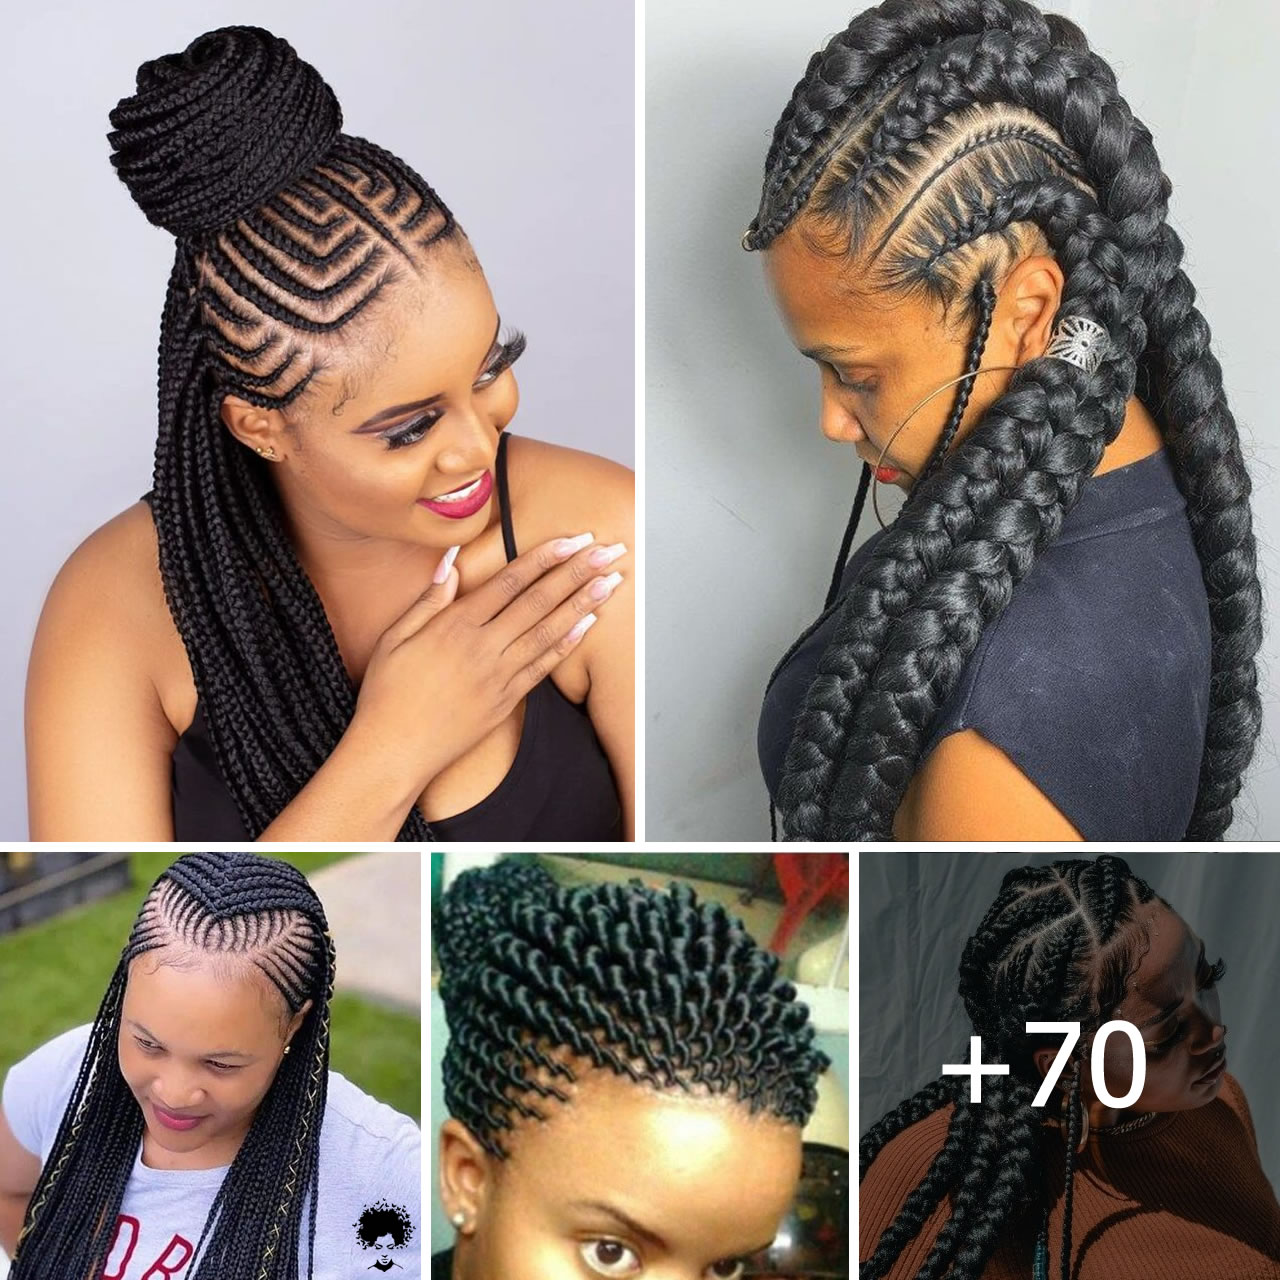 65+ Stunning Photos: Explore the Beauty and Diversity of Ghana Braided Hairstyles